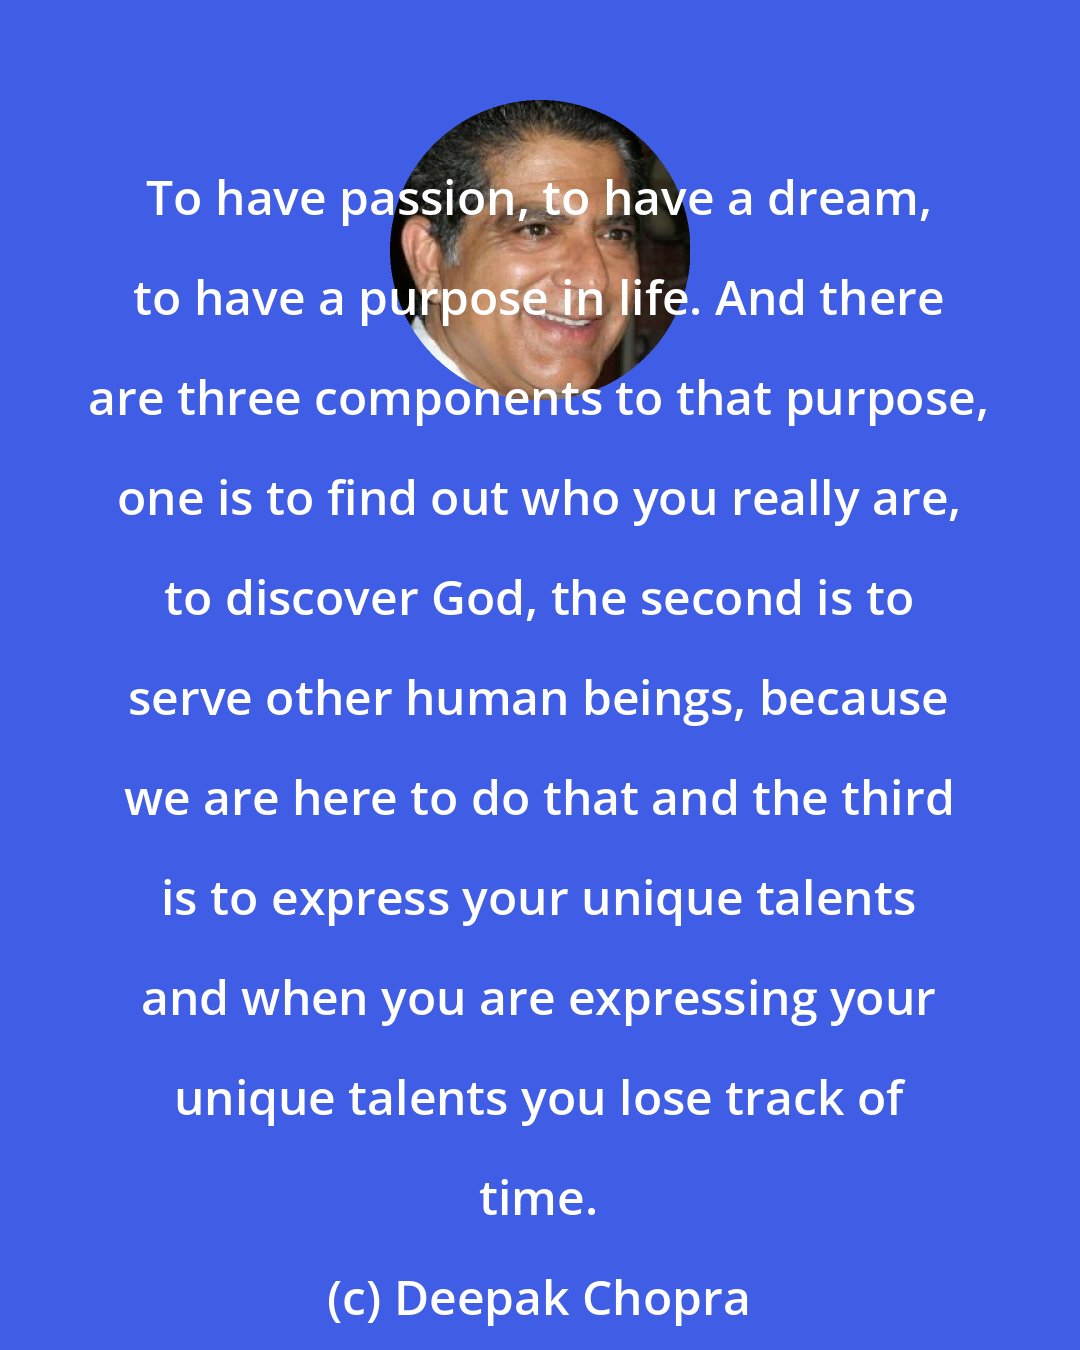 Deepak Chopra: To have passion, to have a dream, to have a purpose in life. And there are three components to that purpose, one is to find out who you really are, to discover God, the second is to serve other human beings, because we are here to do that and the third is to express your unique talents and when you are expressing your unique talents you lose track of time.